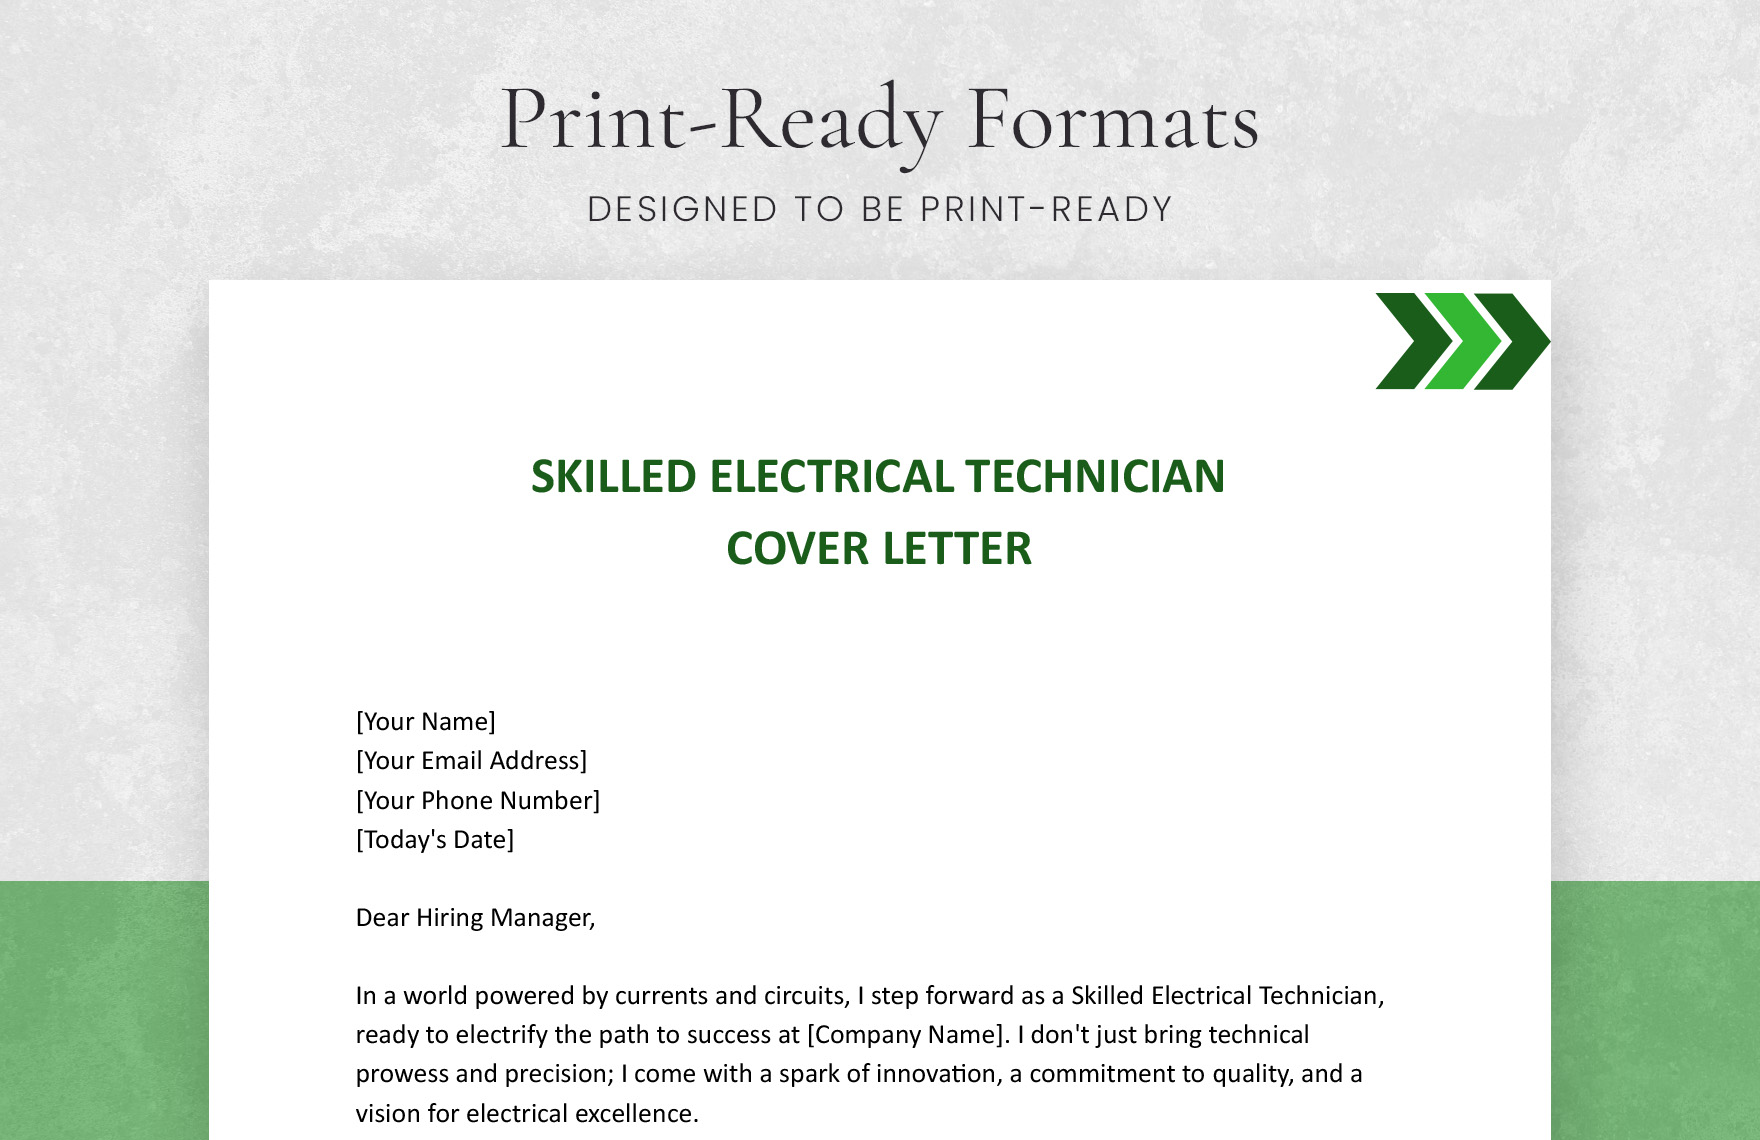 Skilled Electrical Technician Cover Letter